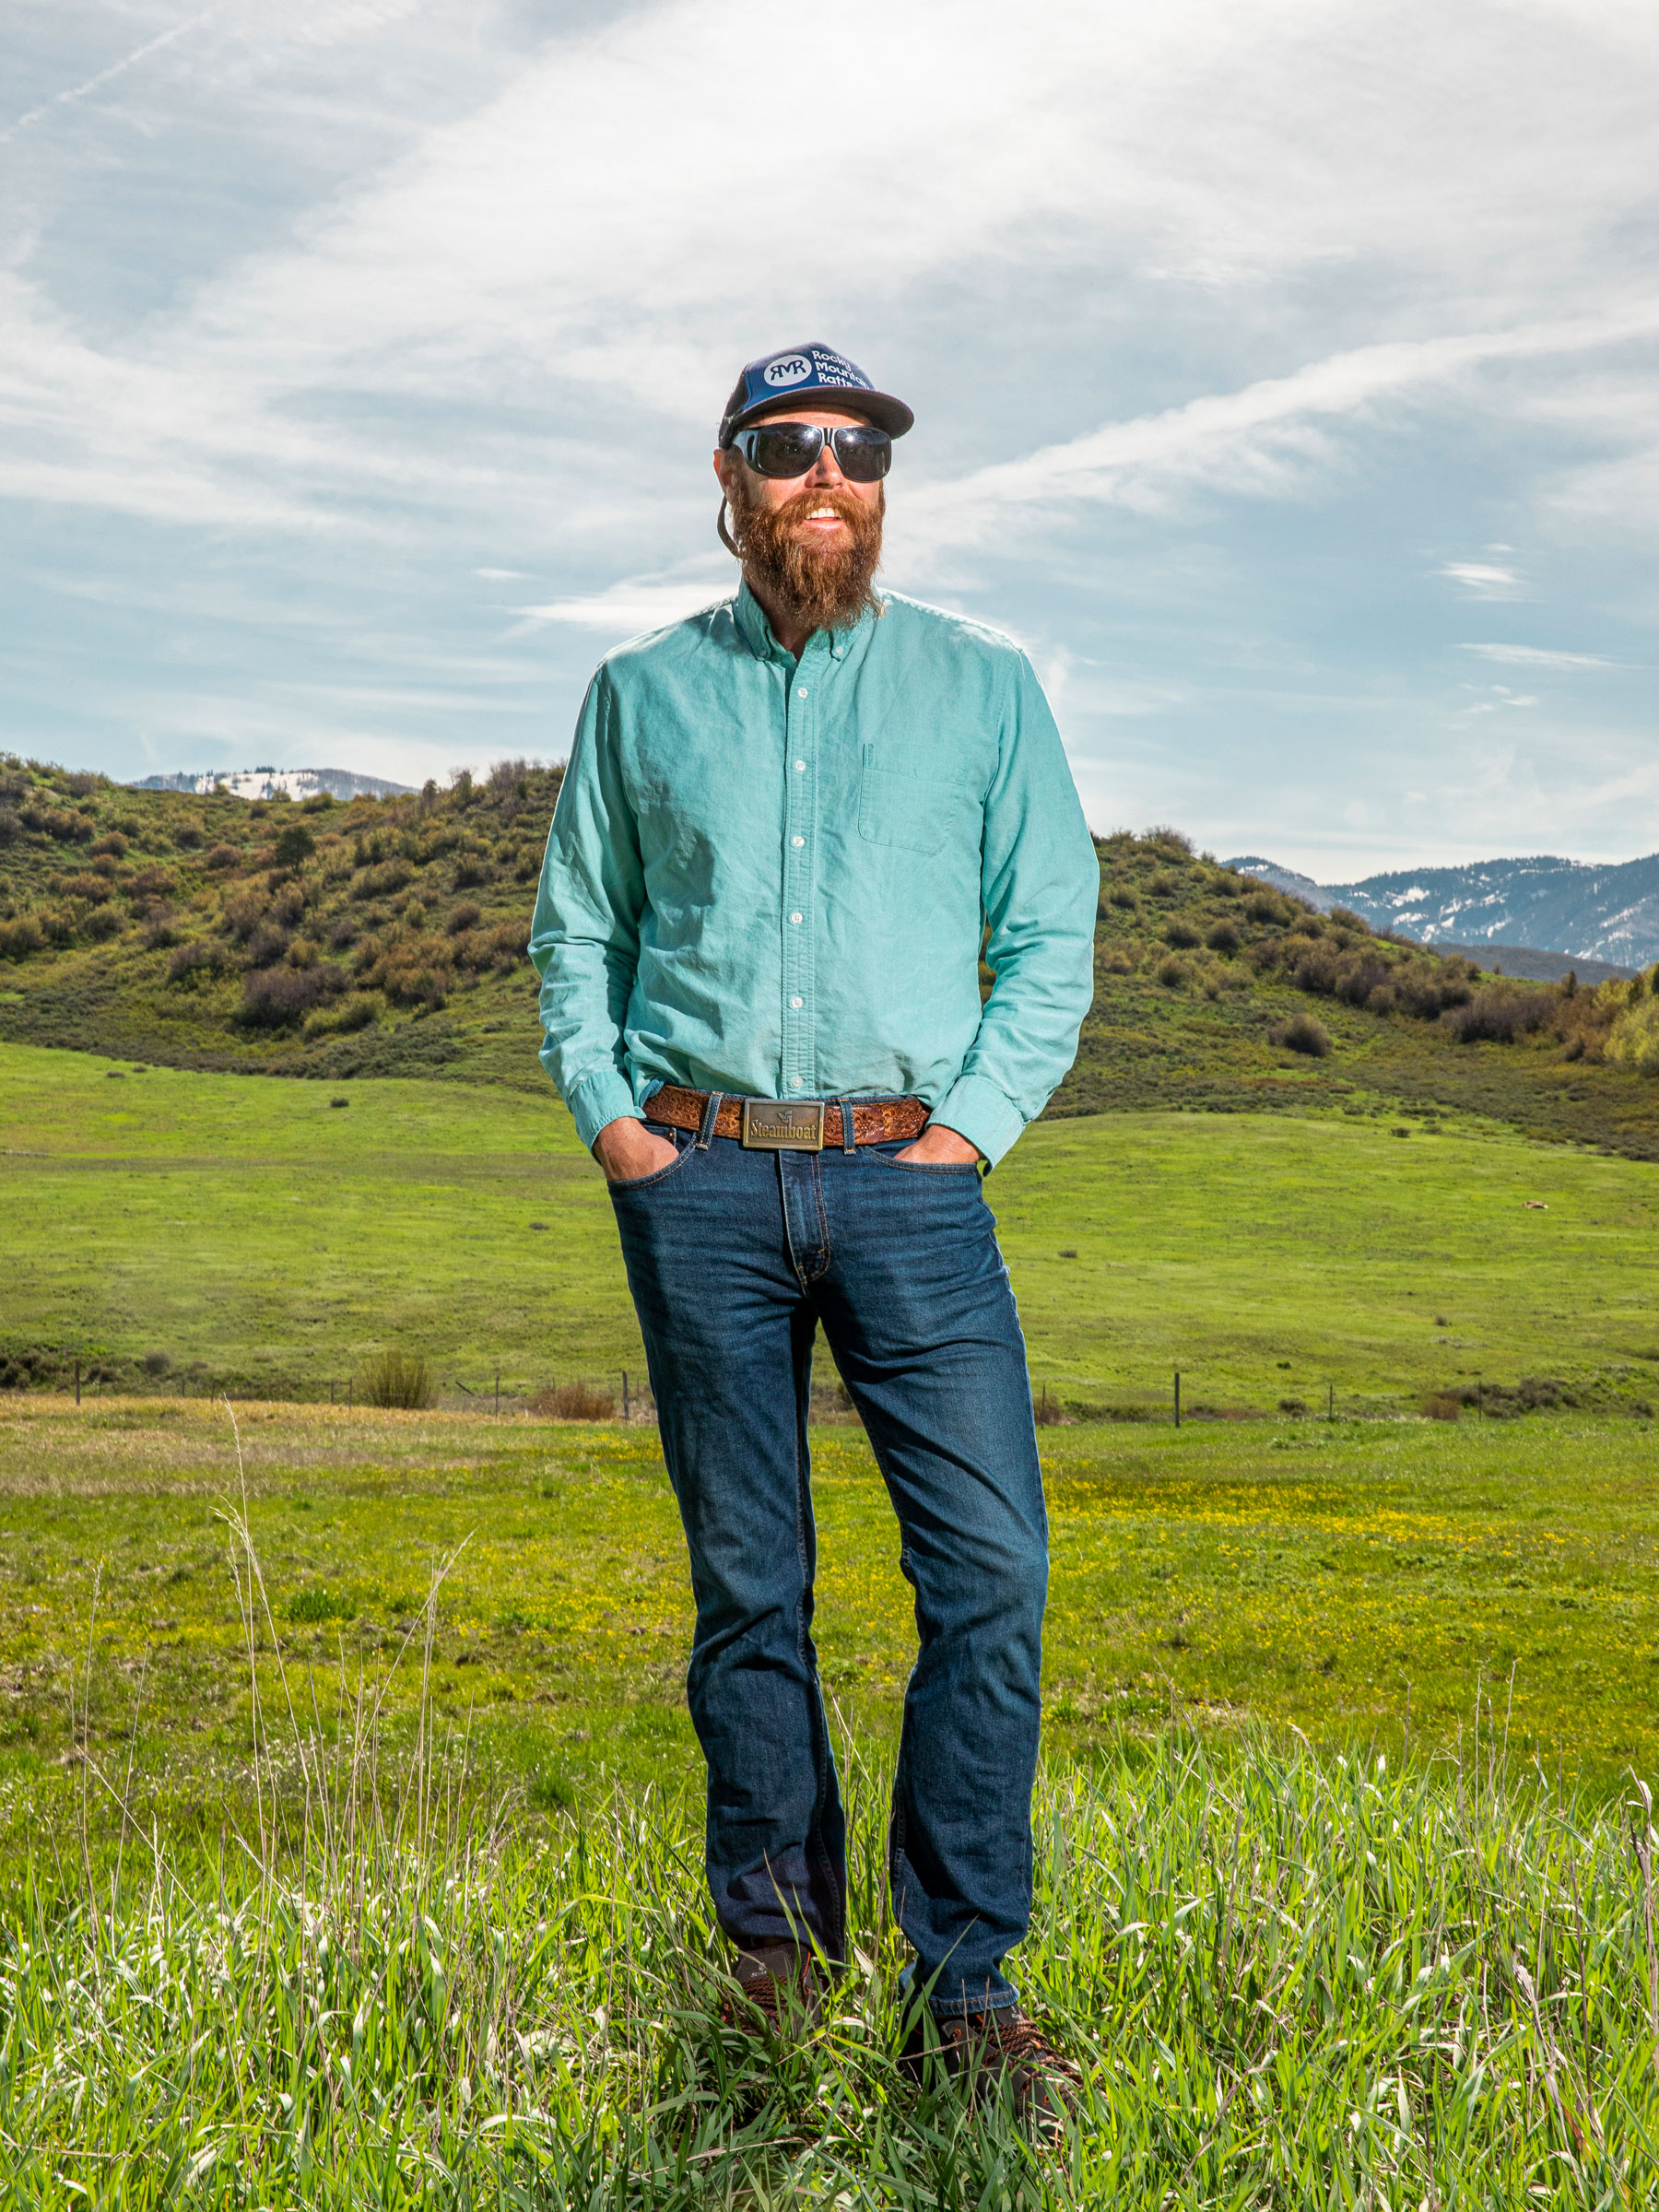 Jason Peasley, Exectutive Director of the Yampa Valley Housing Authority, stands on Brown Ranch just west of the city of Steamboat Springs, Colorado on May 16, 2022. (David Williams for TIME)